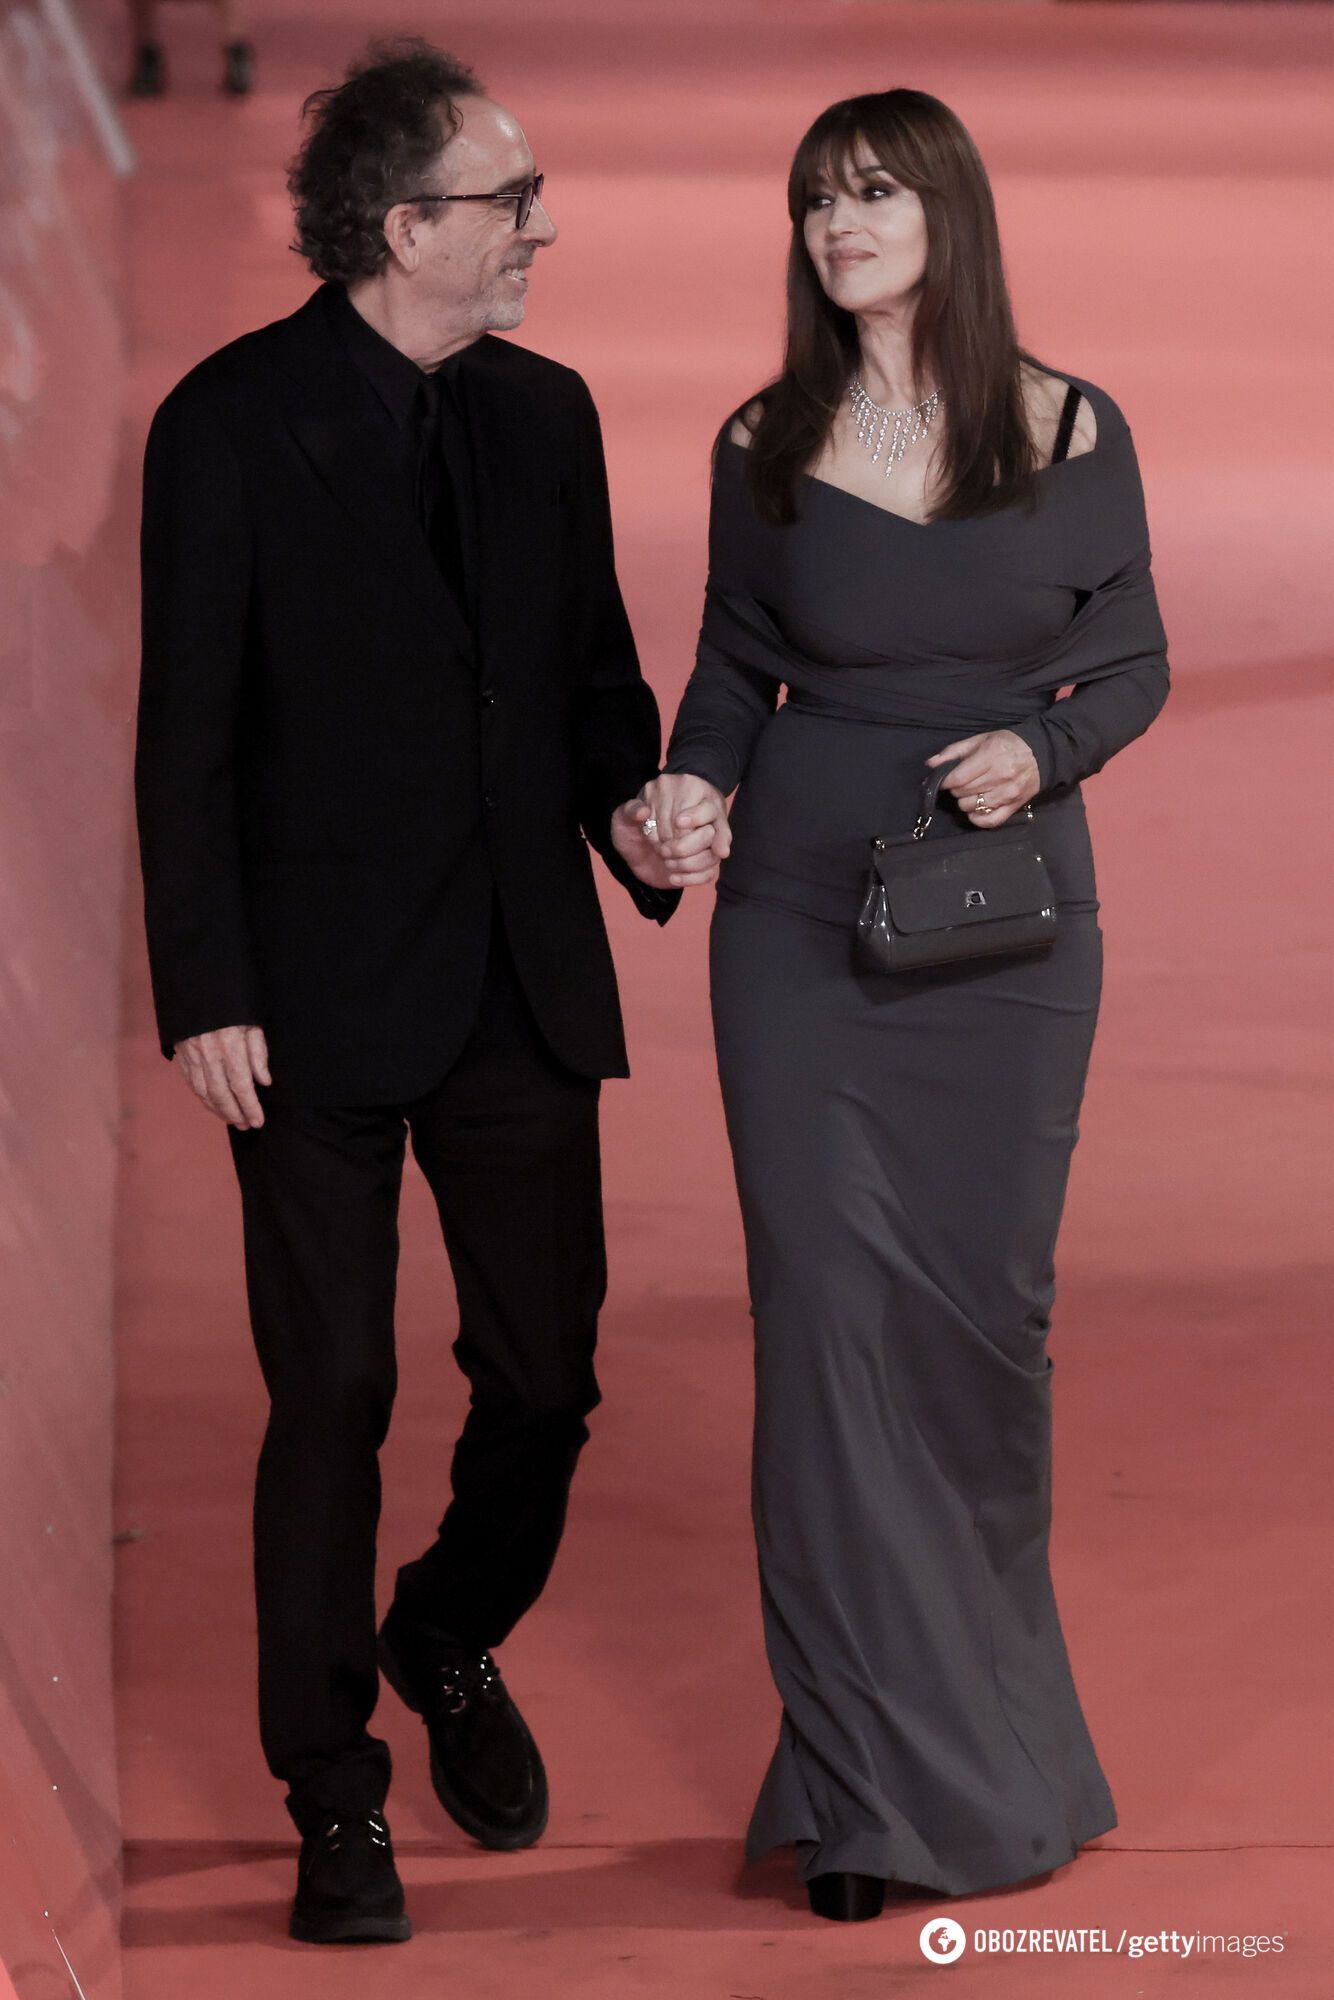 Monica Bellucci, 59, and Tim Burton, 65, made their first public appearance together after confirming their romance. Photo